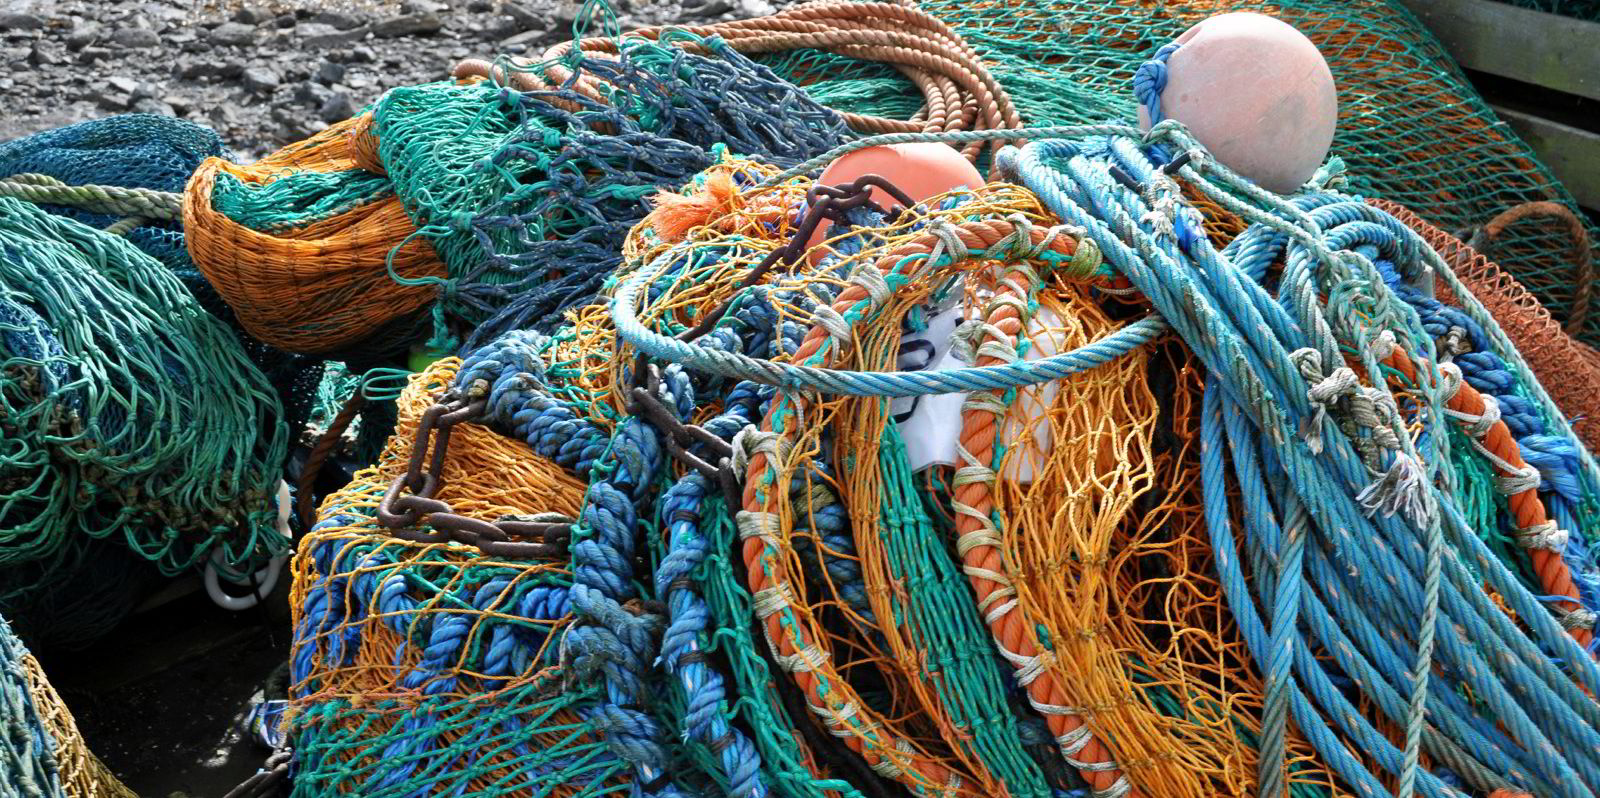 Cyprus Sea Lines says fishing net was catalyst for Aussie bulker ban